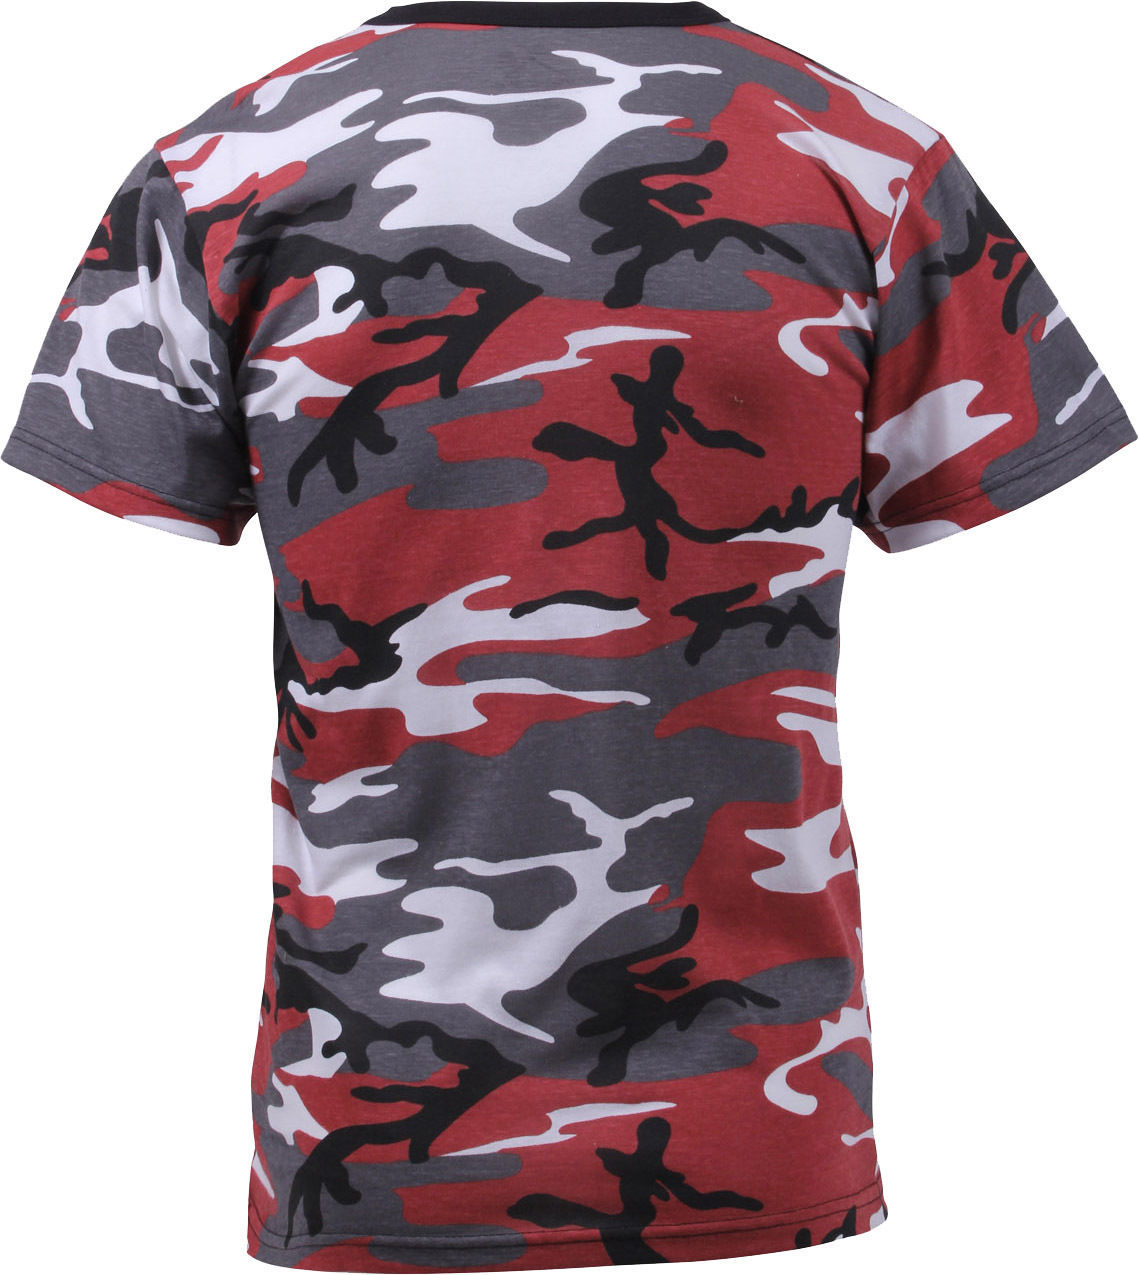 Mens Red Camouflage Tactical Military Short Sleeve T-Shirt - T-Shirts ...